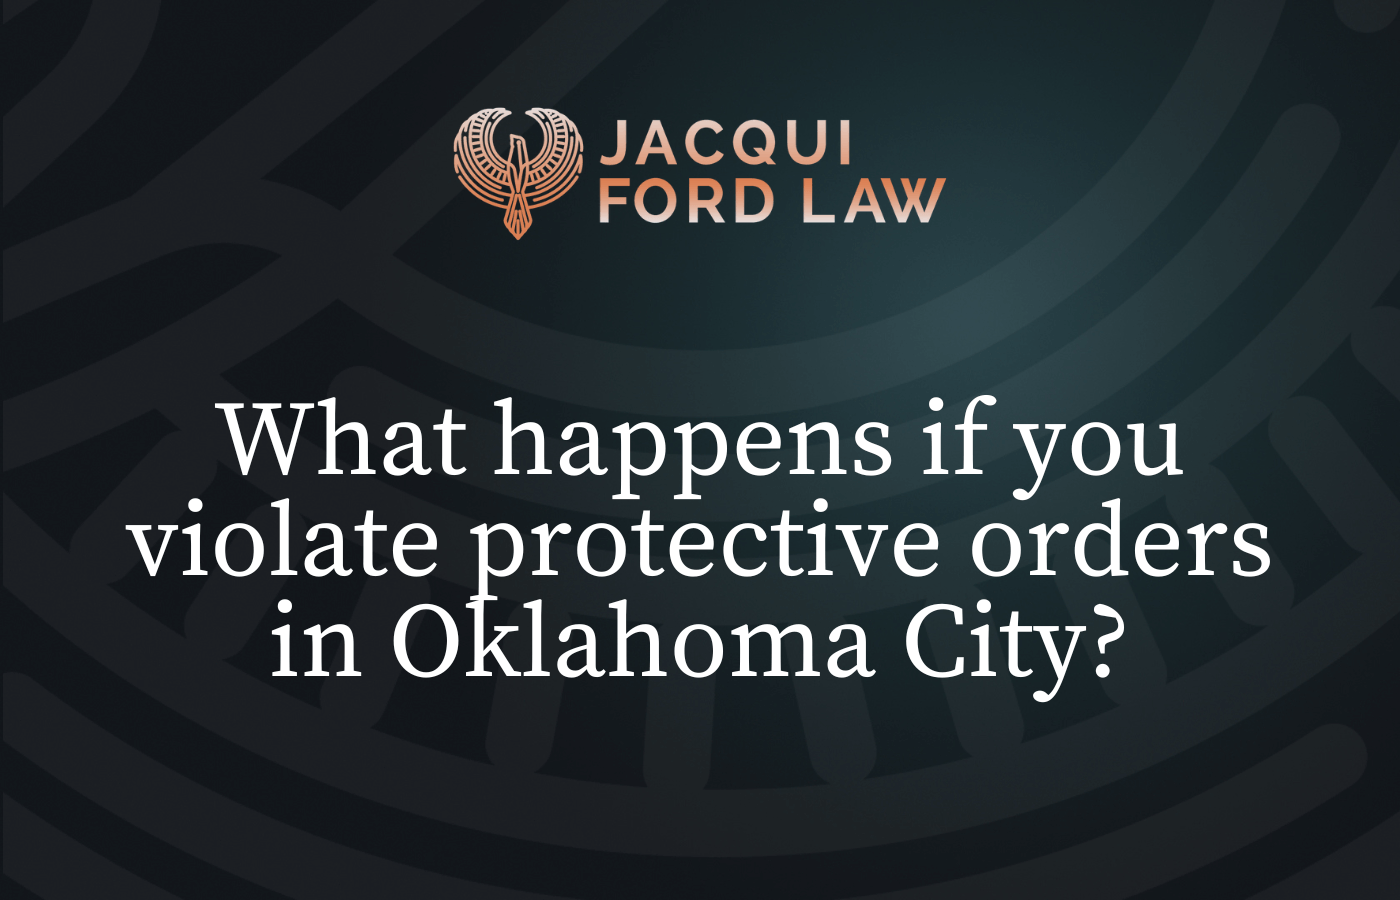 What happens if you violate protective orders in Oklahoma City - Jacqui Ford Law Oklahoma City Criminal Defense